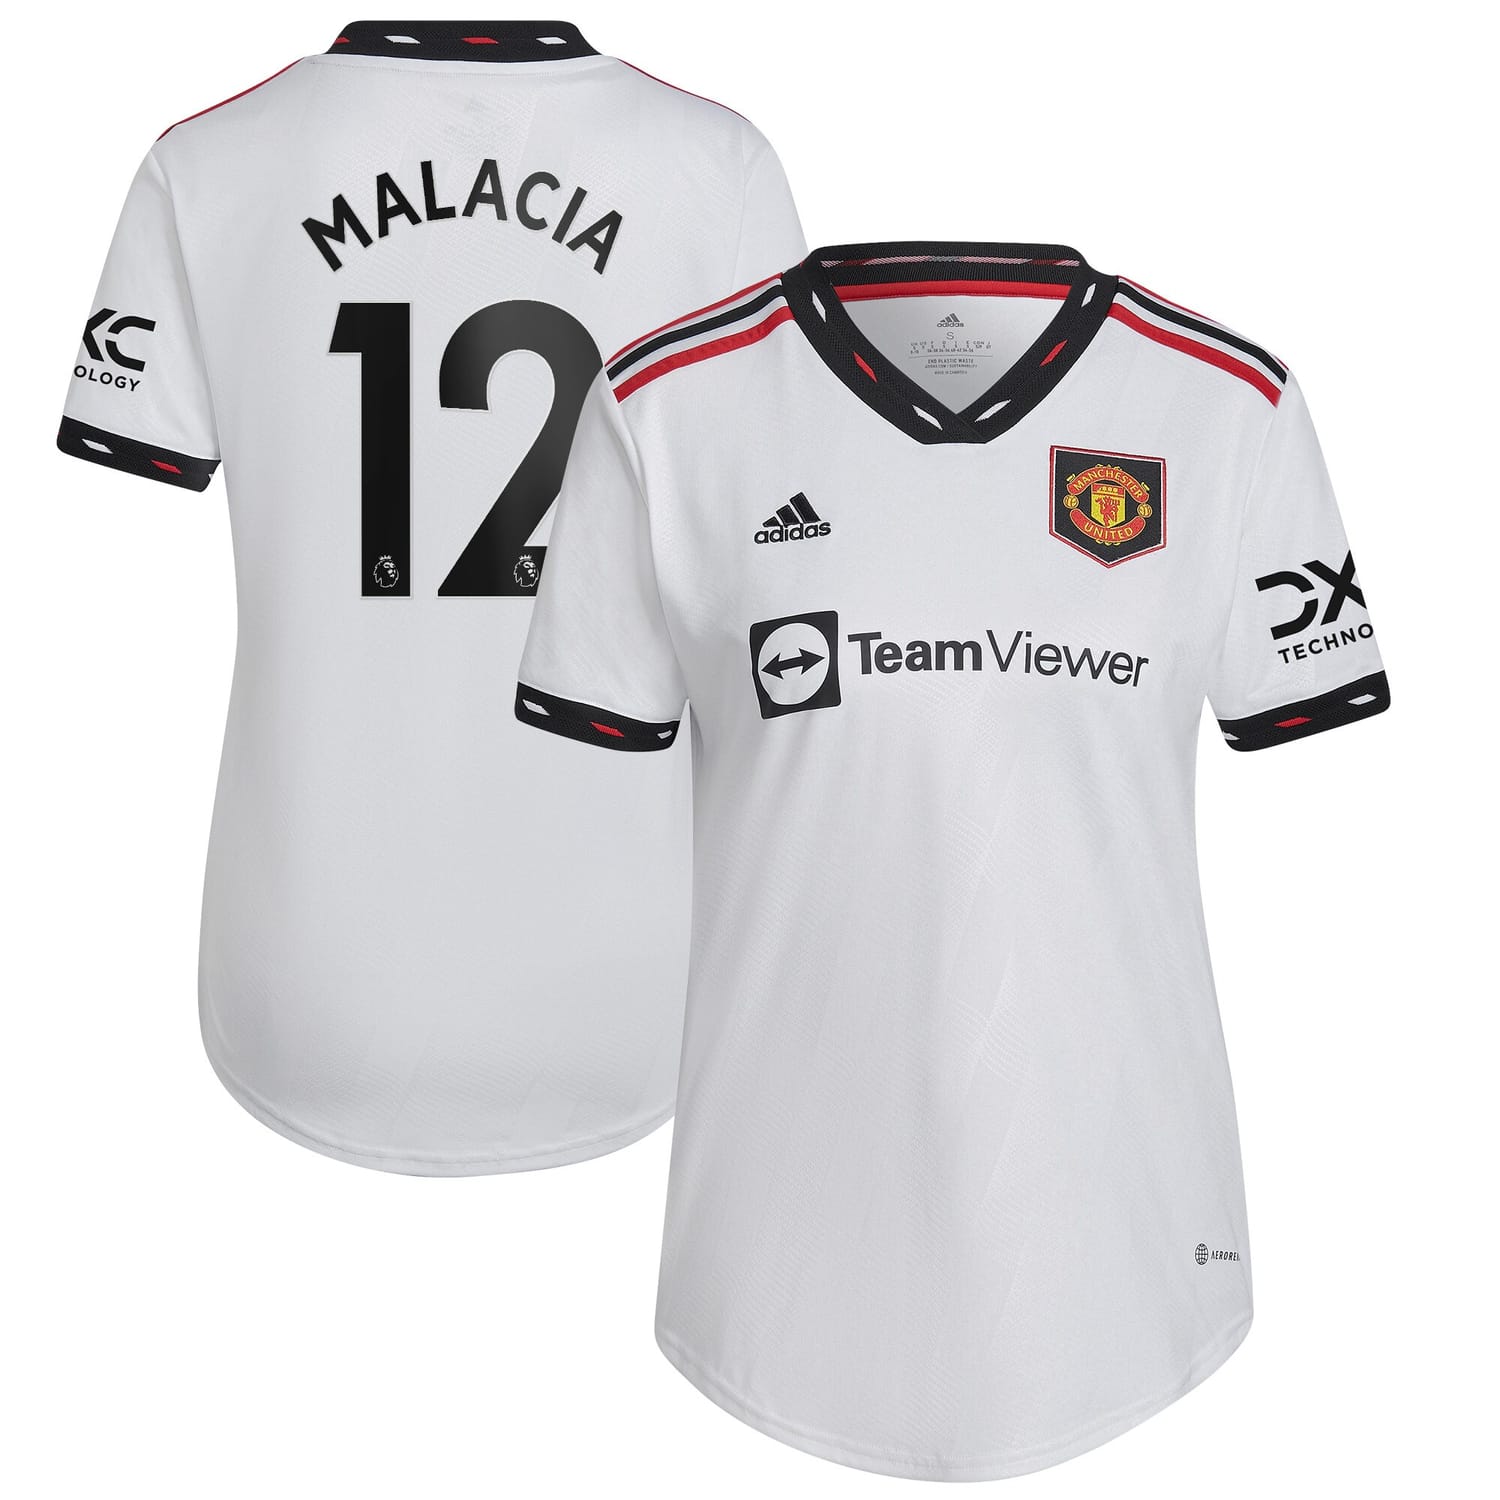 Premier League Manchester United Away Jersey Shirt White 2022-23 player Tyrell Malacia printing for Women